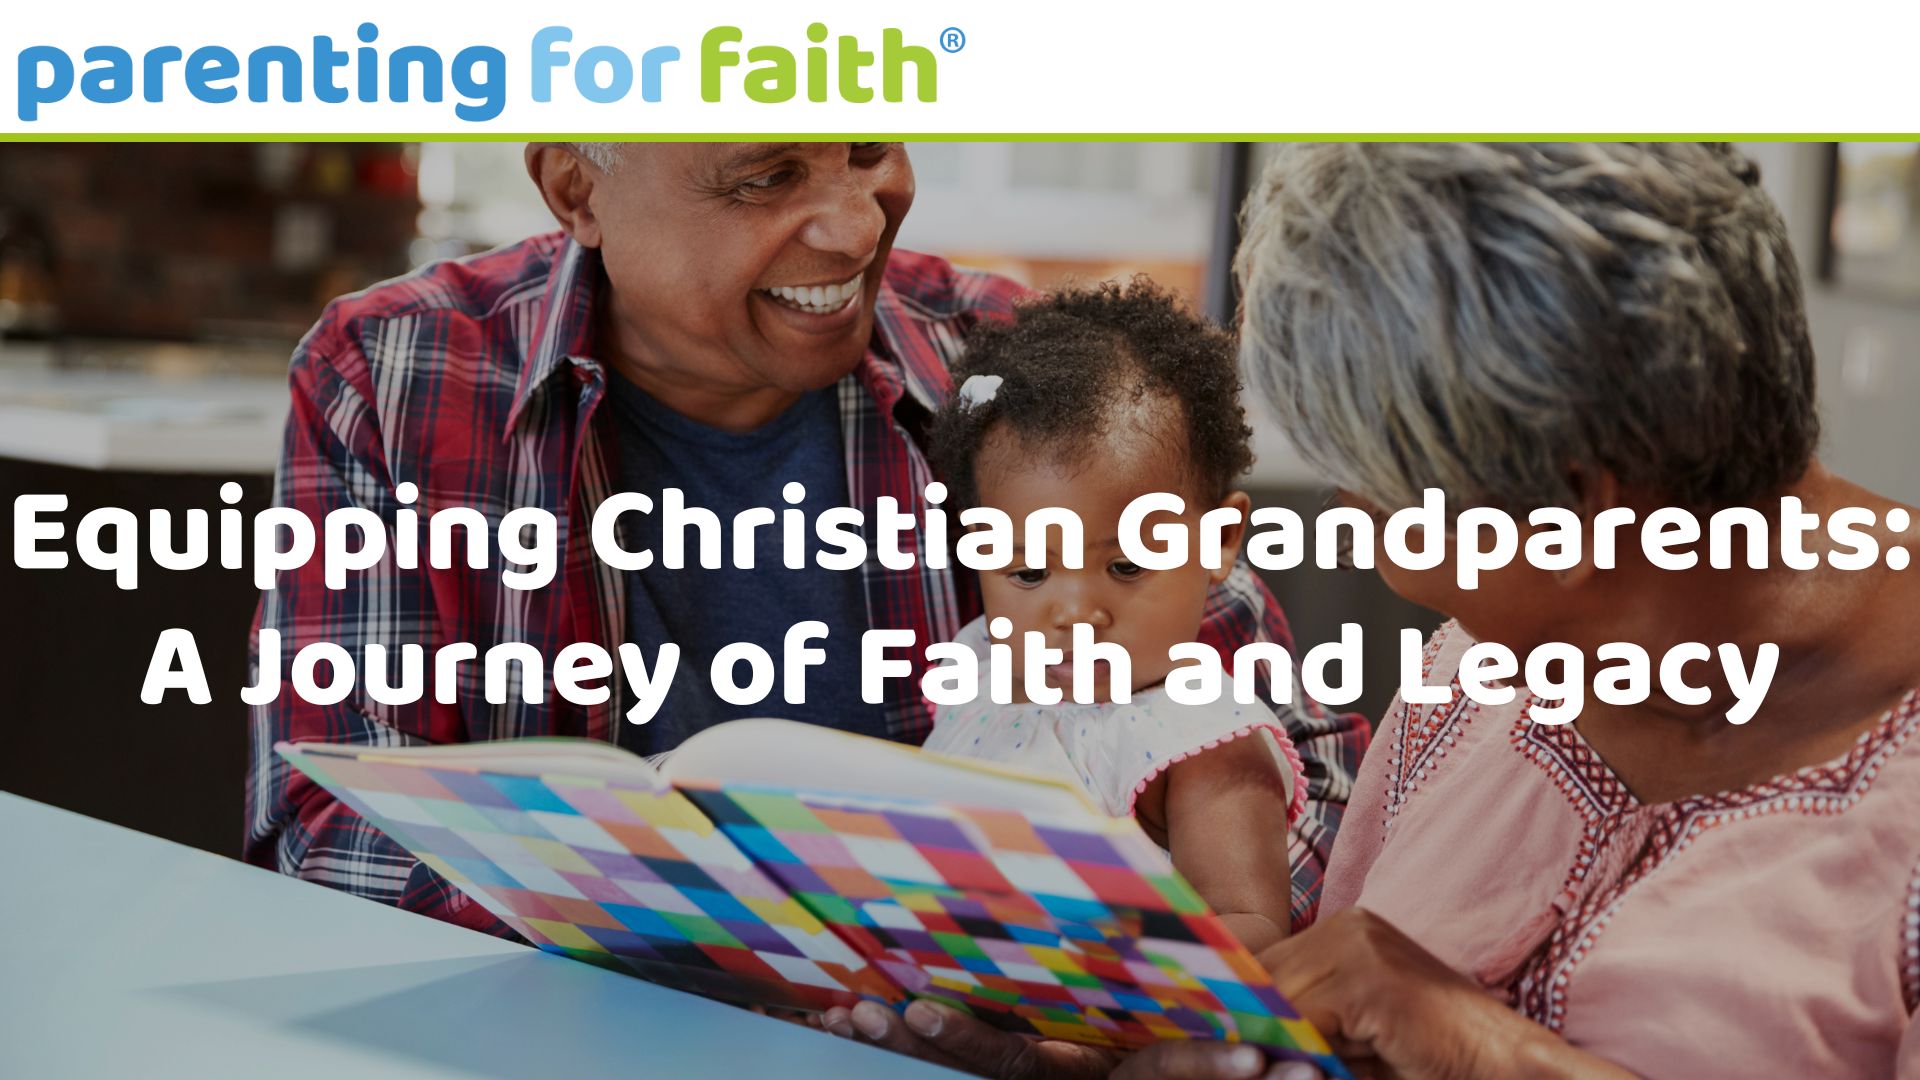 Equipping Christian Grandparents A Journey of Faith and Legacy image credit monkey business images